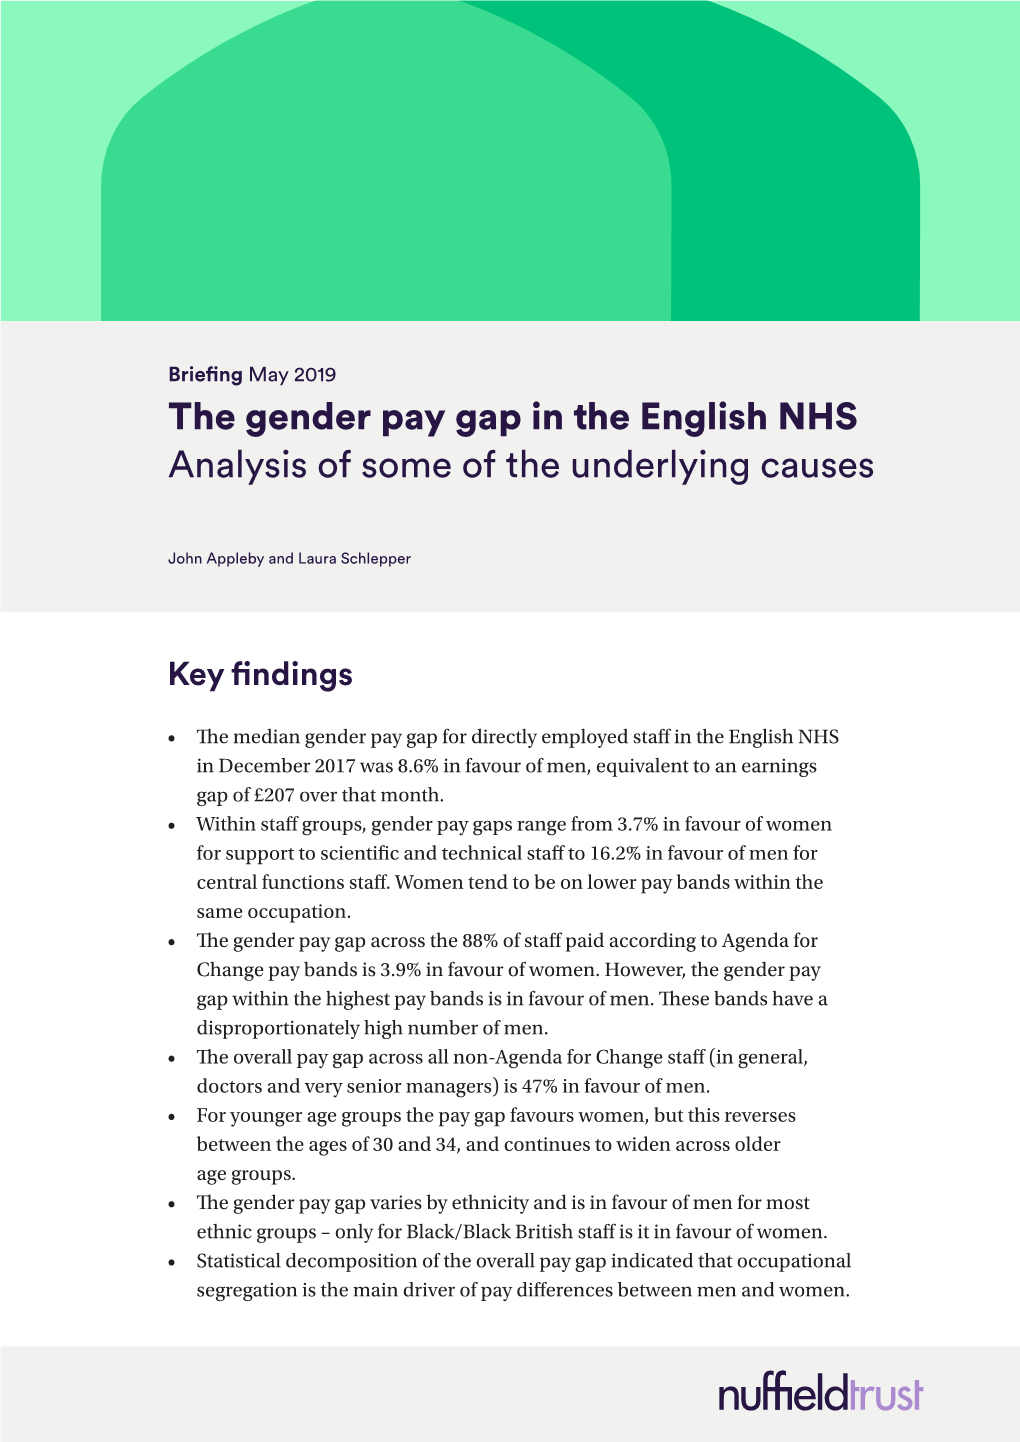 The Gender Pay Gap in the English NHS Analysis of Some of the Underlying Causes